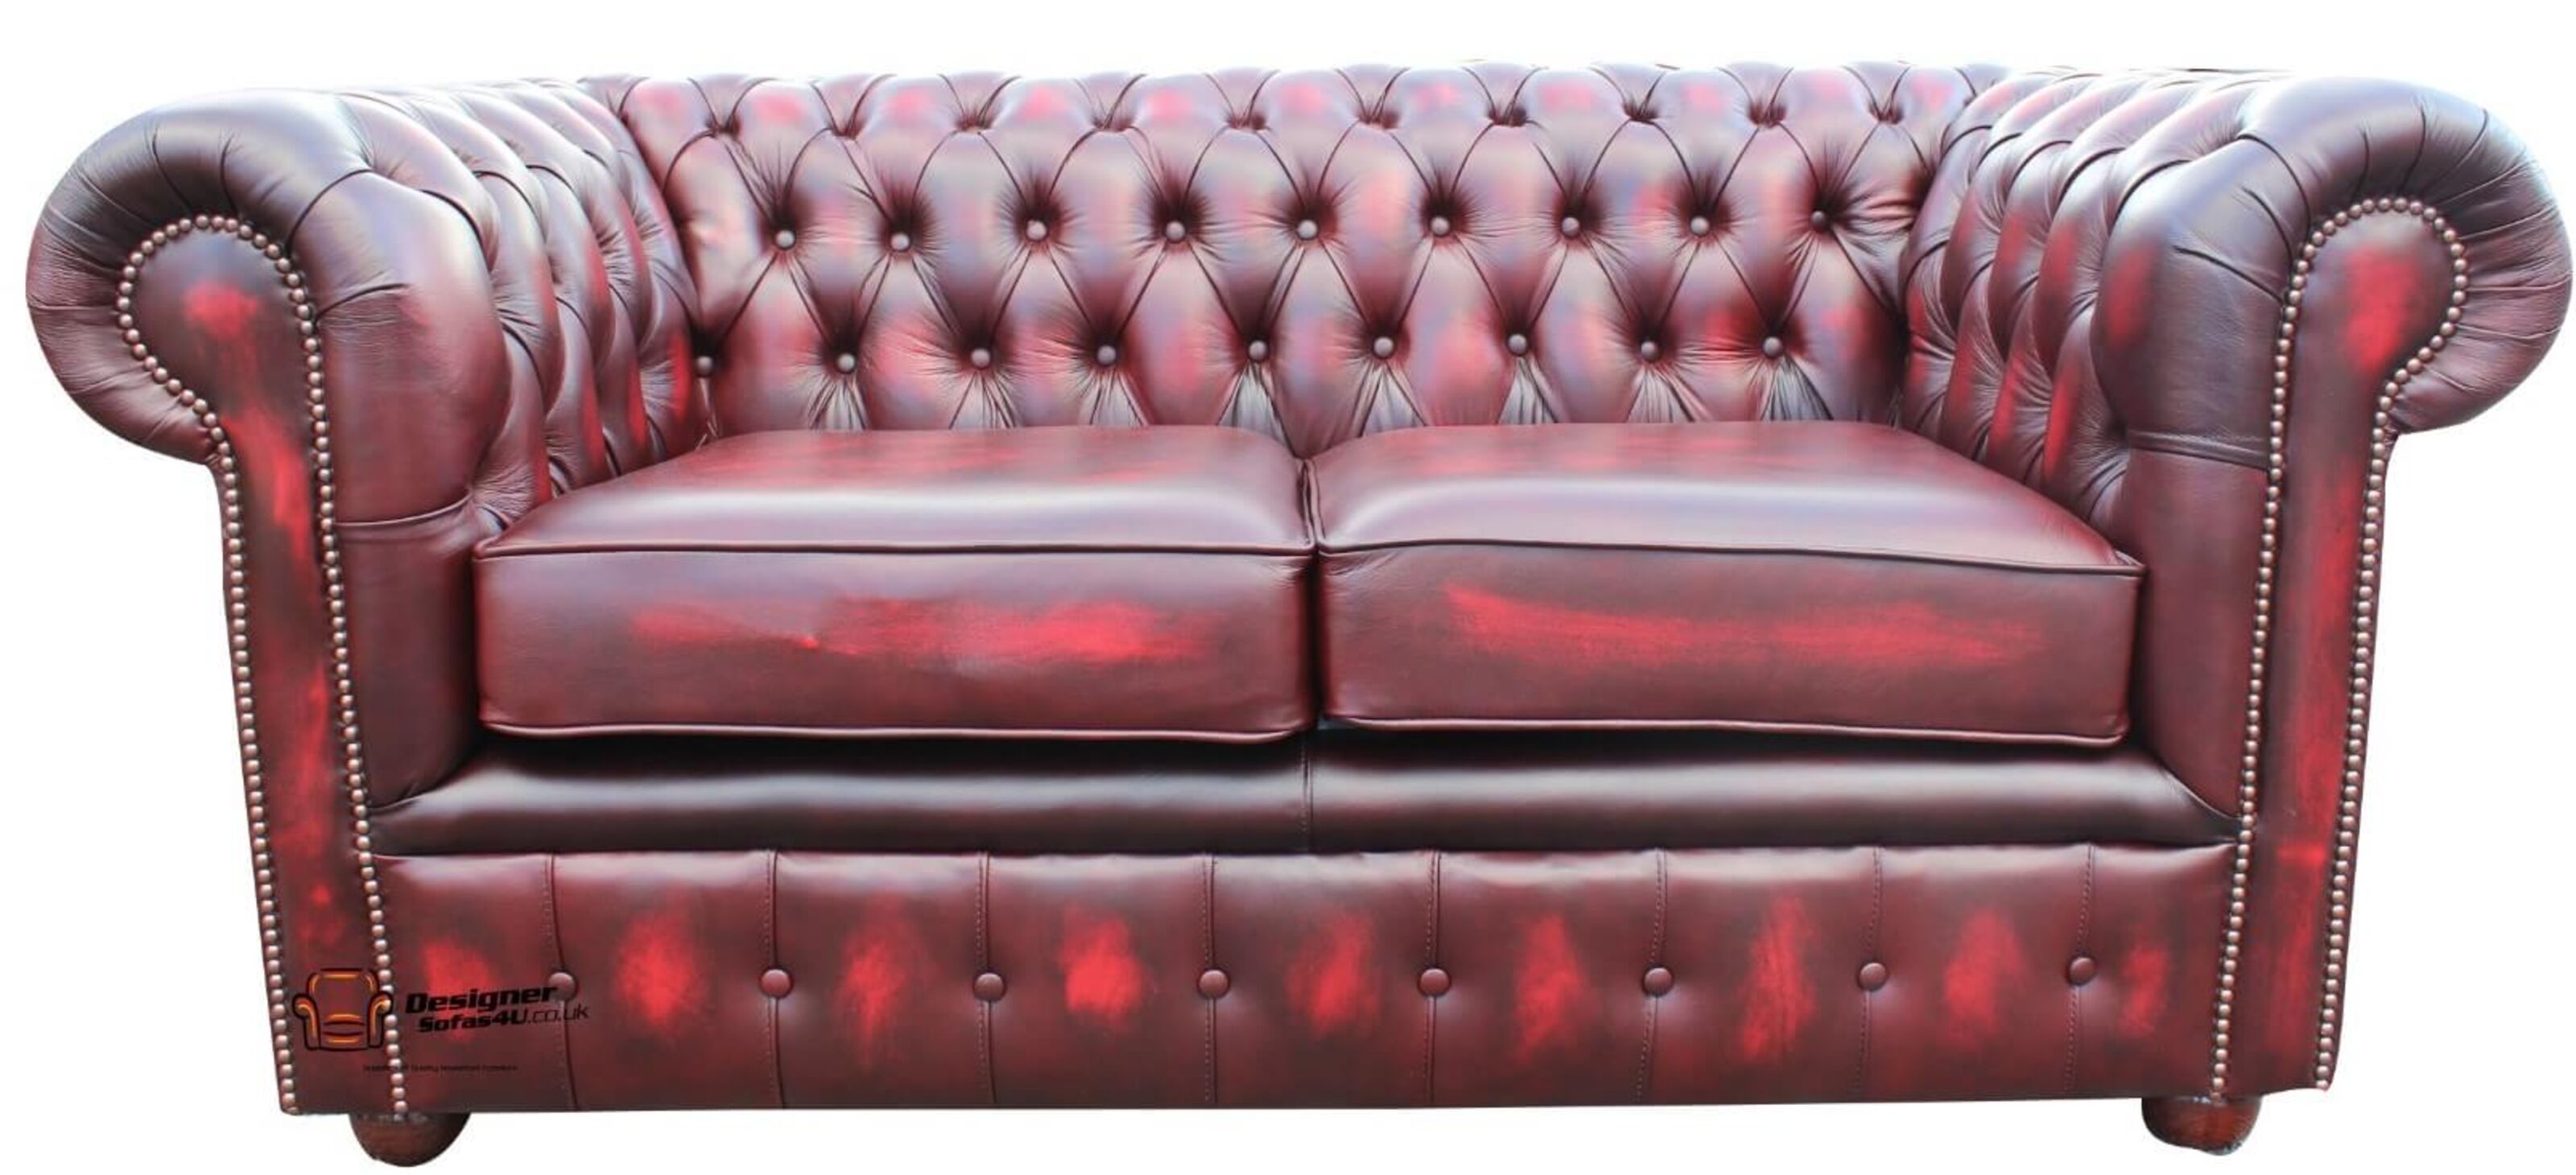 Pocket-Friendly Perfection Chesterfield Sofas at a Discount  %Post Title